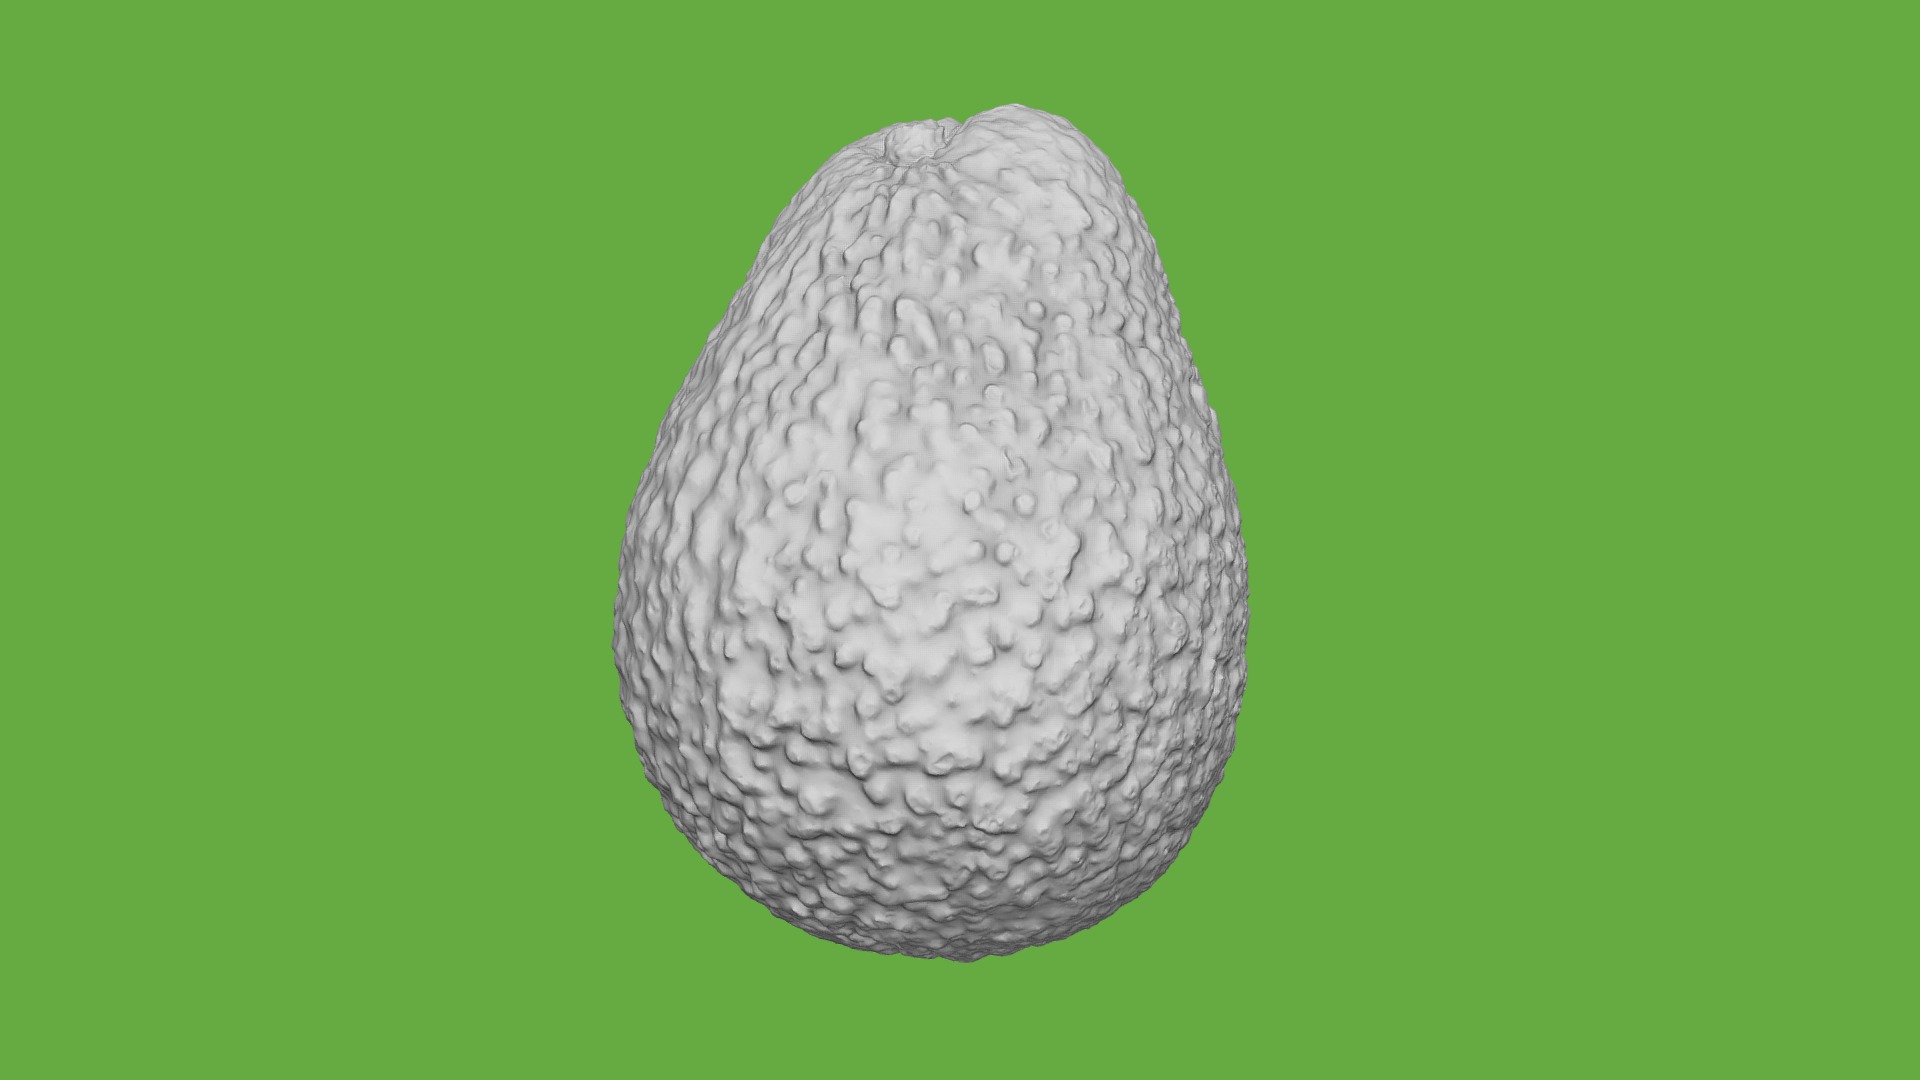 3D model Avocado: 3D Print – Whole - This is a 3D model of the Avocado: 3D Print - Whole. The 3D model is about a white rock on a green background.